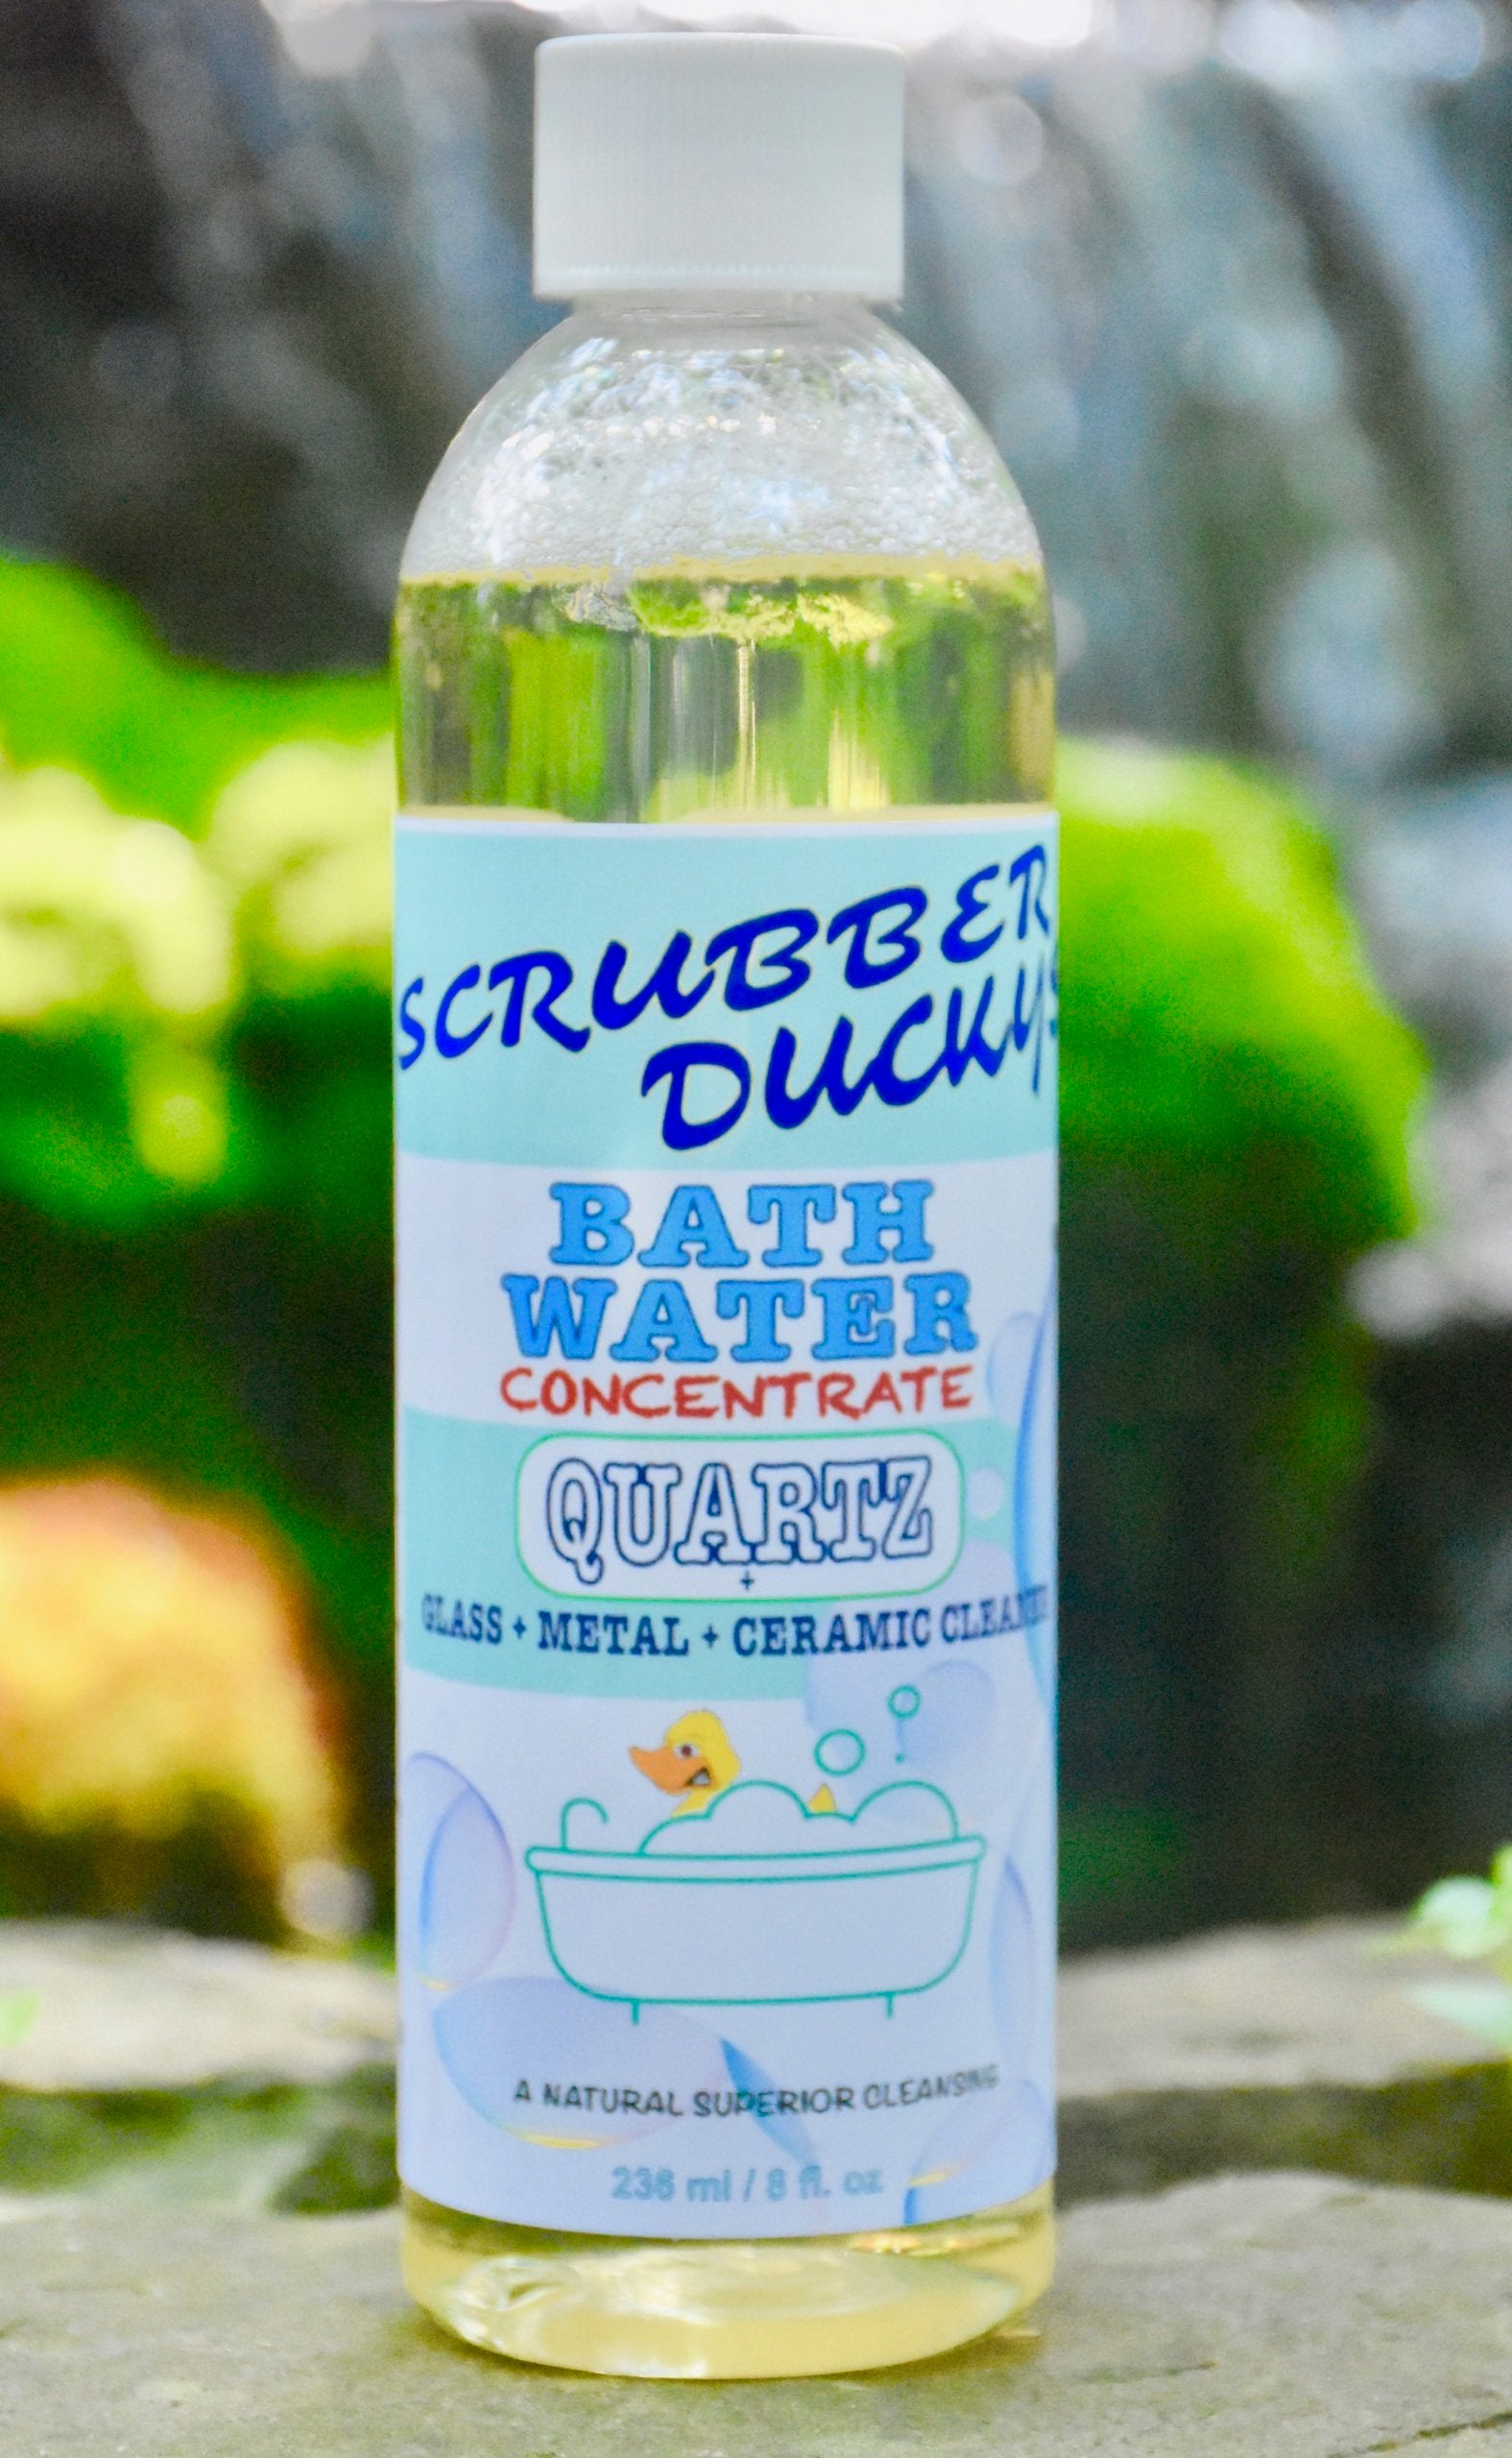 Clean with the power of nature using our All NEW formula. Scrubber Duckys BATH WATER Concentrate naturally removes tough built-up stains on any glass or quartz surface! Use alone in place of harsh chemical cleaners